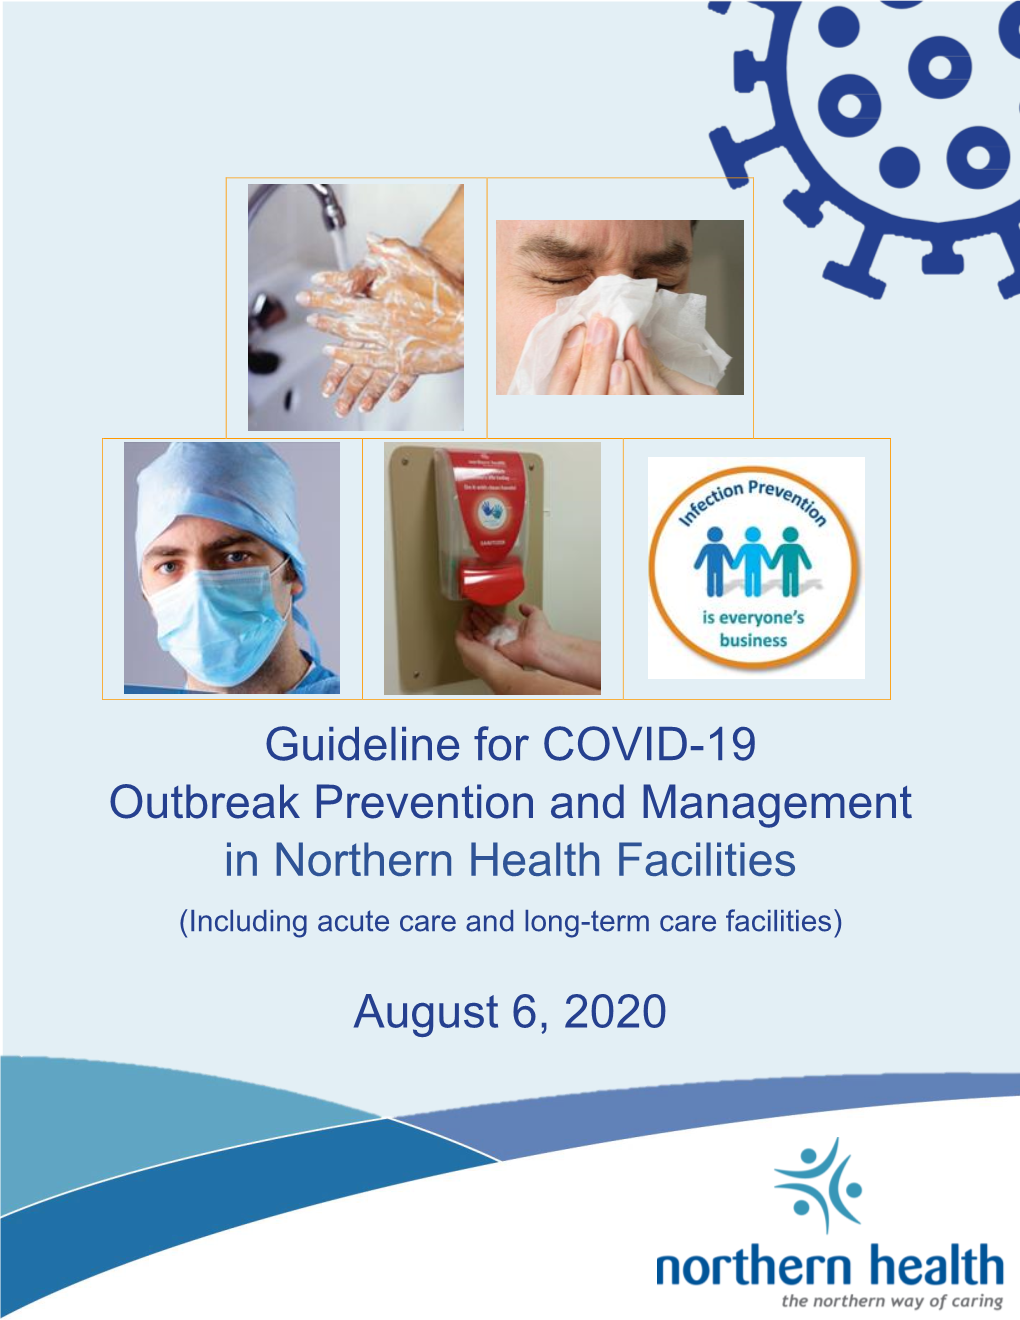 Guideline for COVID-19 Outbreak Prevention and Management in Northern Health Facilities (Including Acute Care and Long-Term Care Facilities)